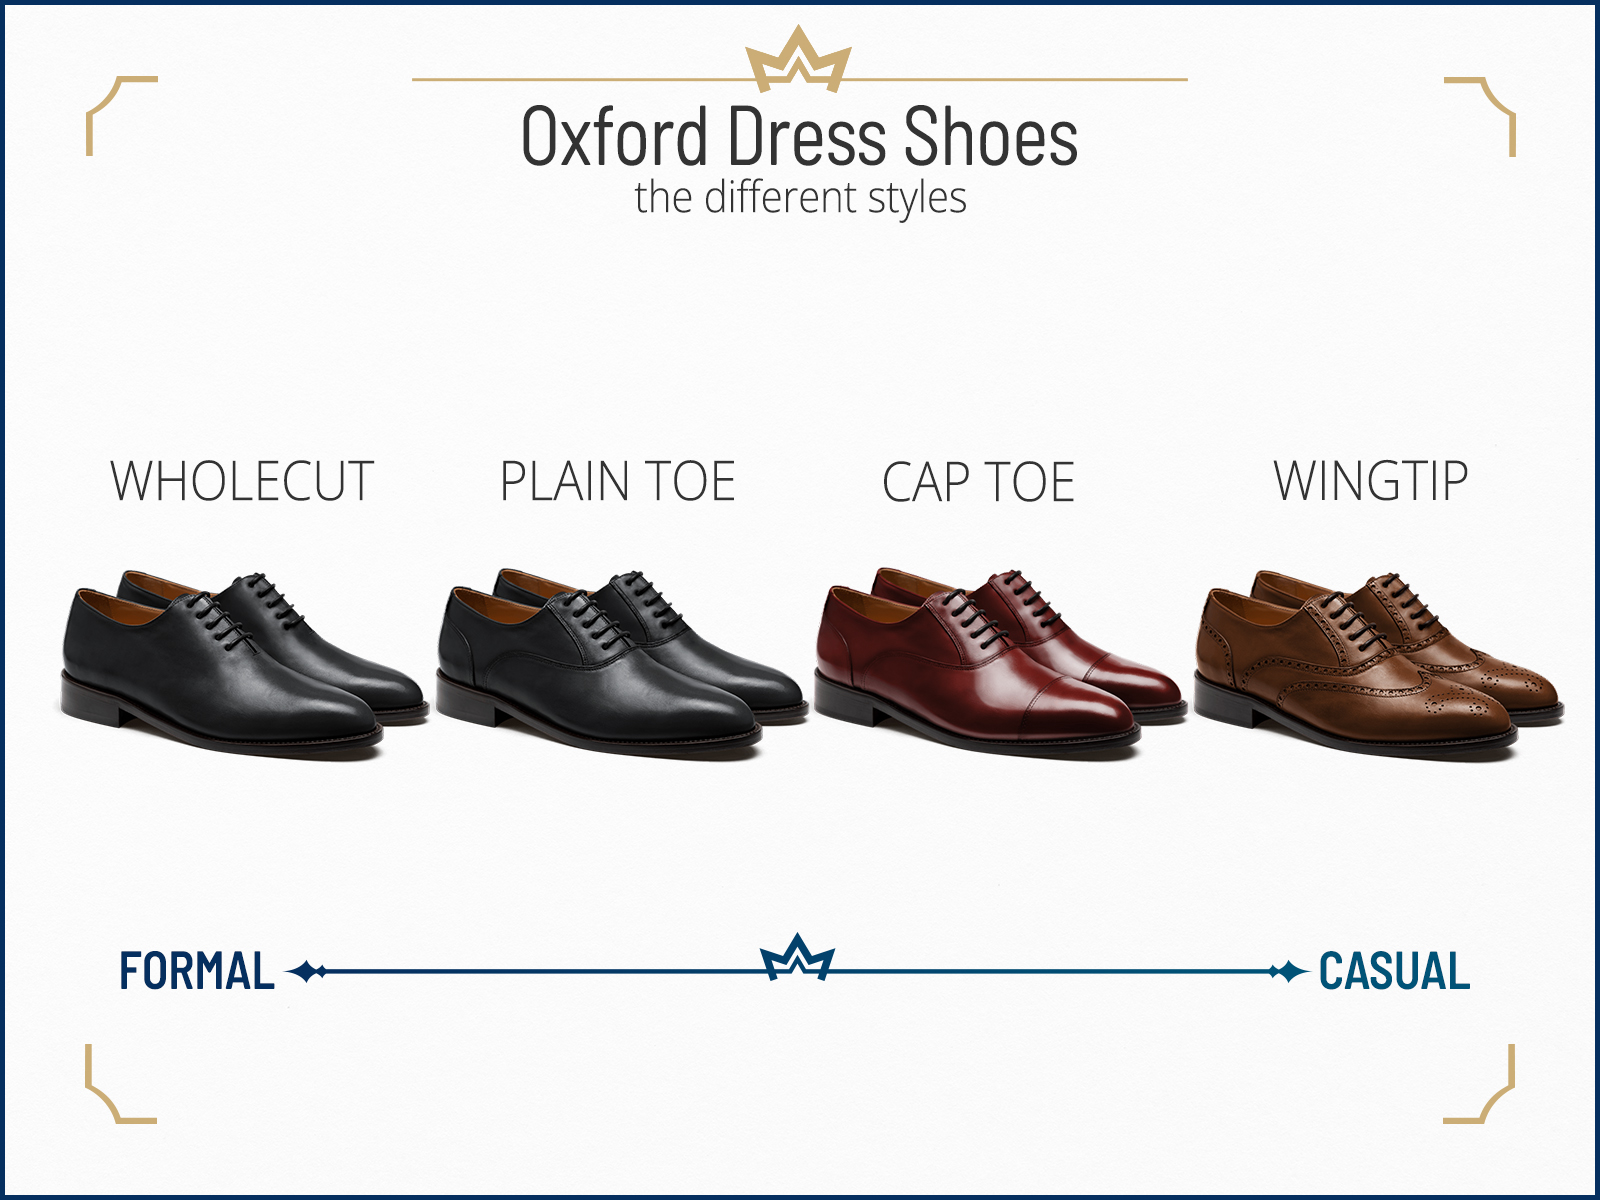 Different oxford dress shoe types